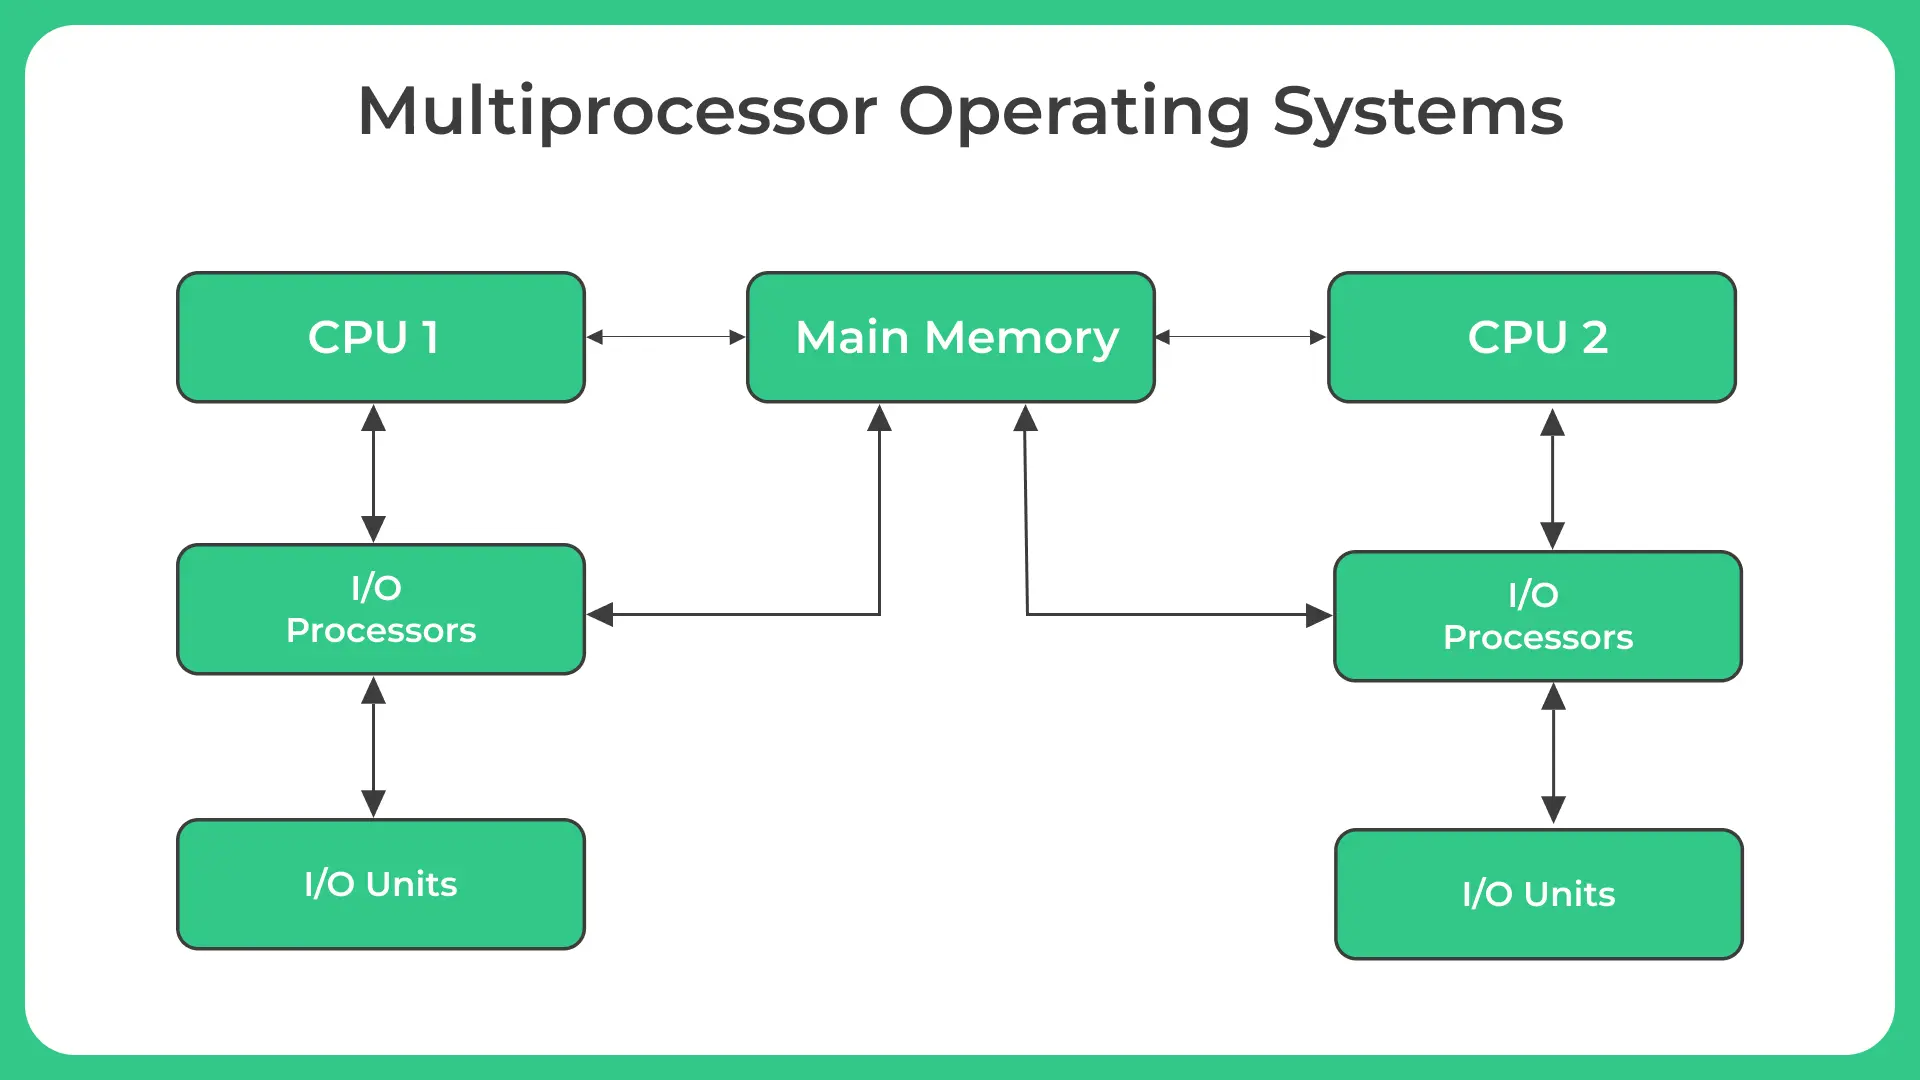 Multiprocessor operating systems